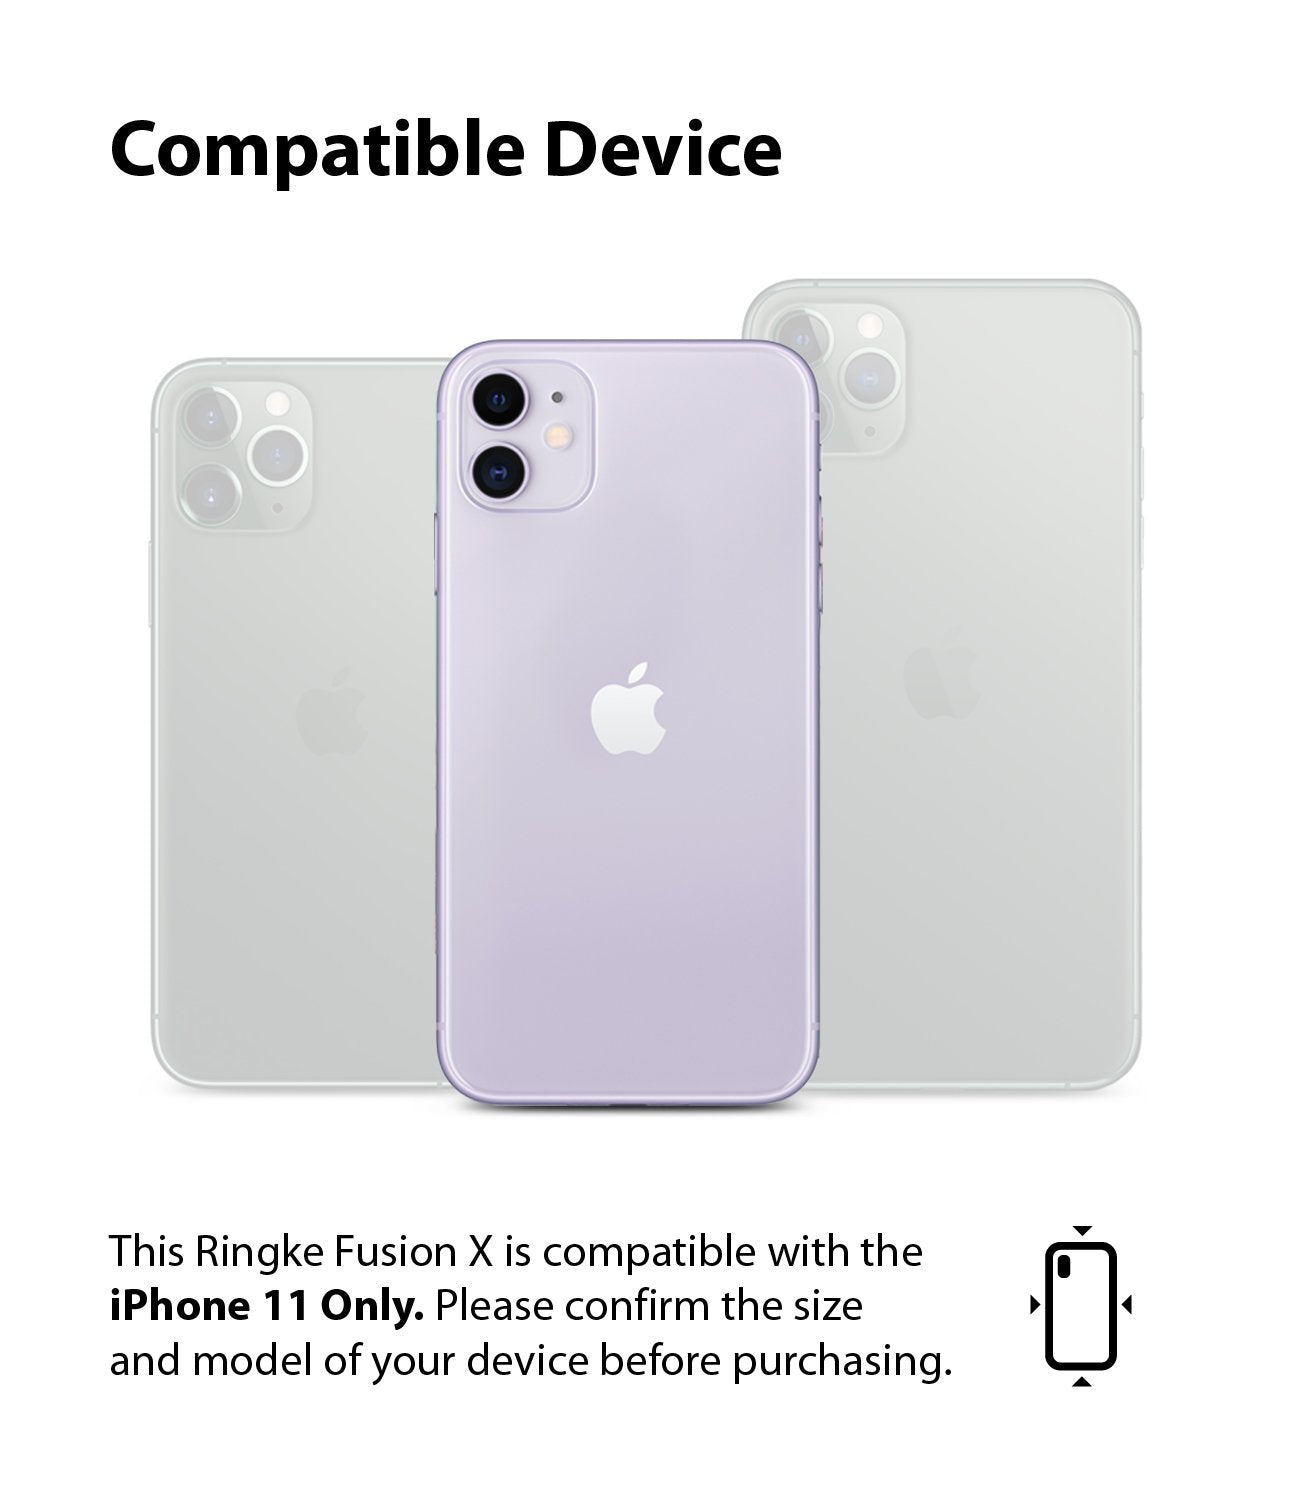 Ringke Fusion-X Matte for iPhone 11 Compatibility